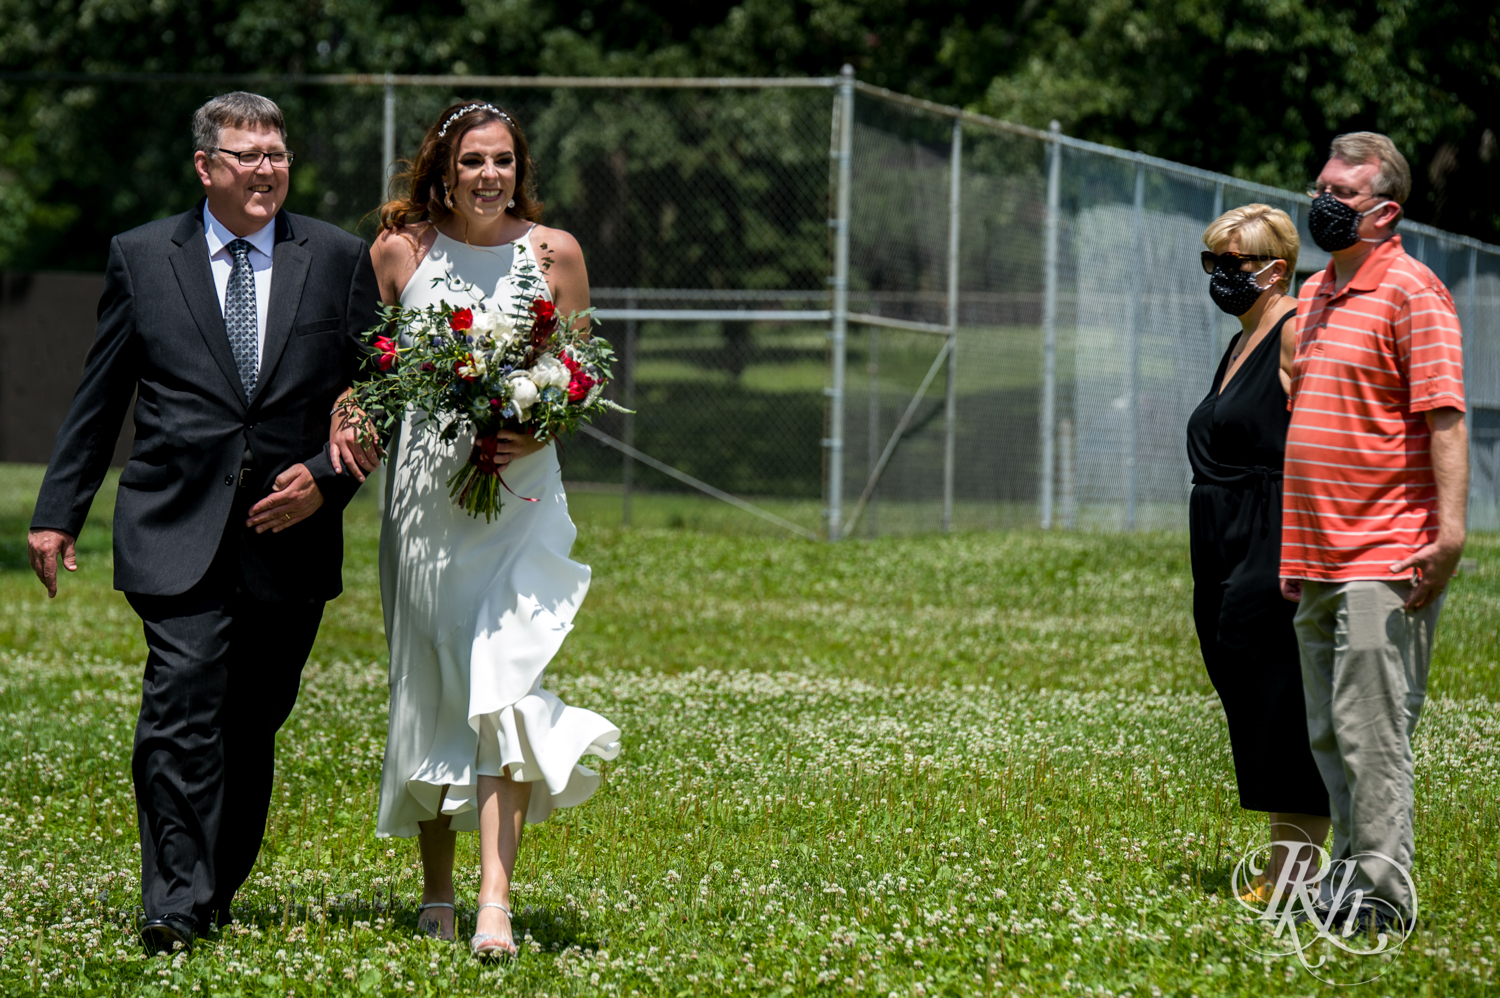 Bride walks down the aisle with her dad in Loring Park in Minneapolis, Minnesota.